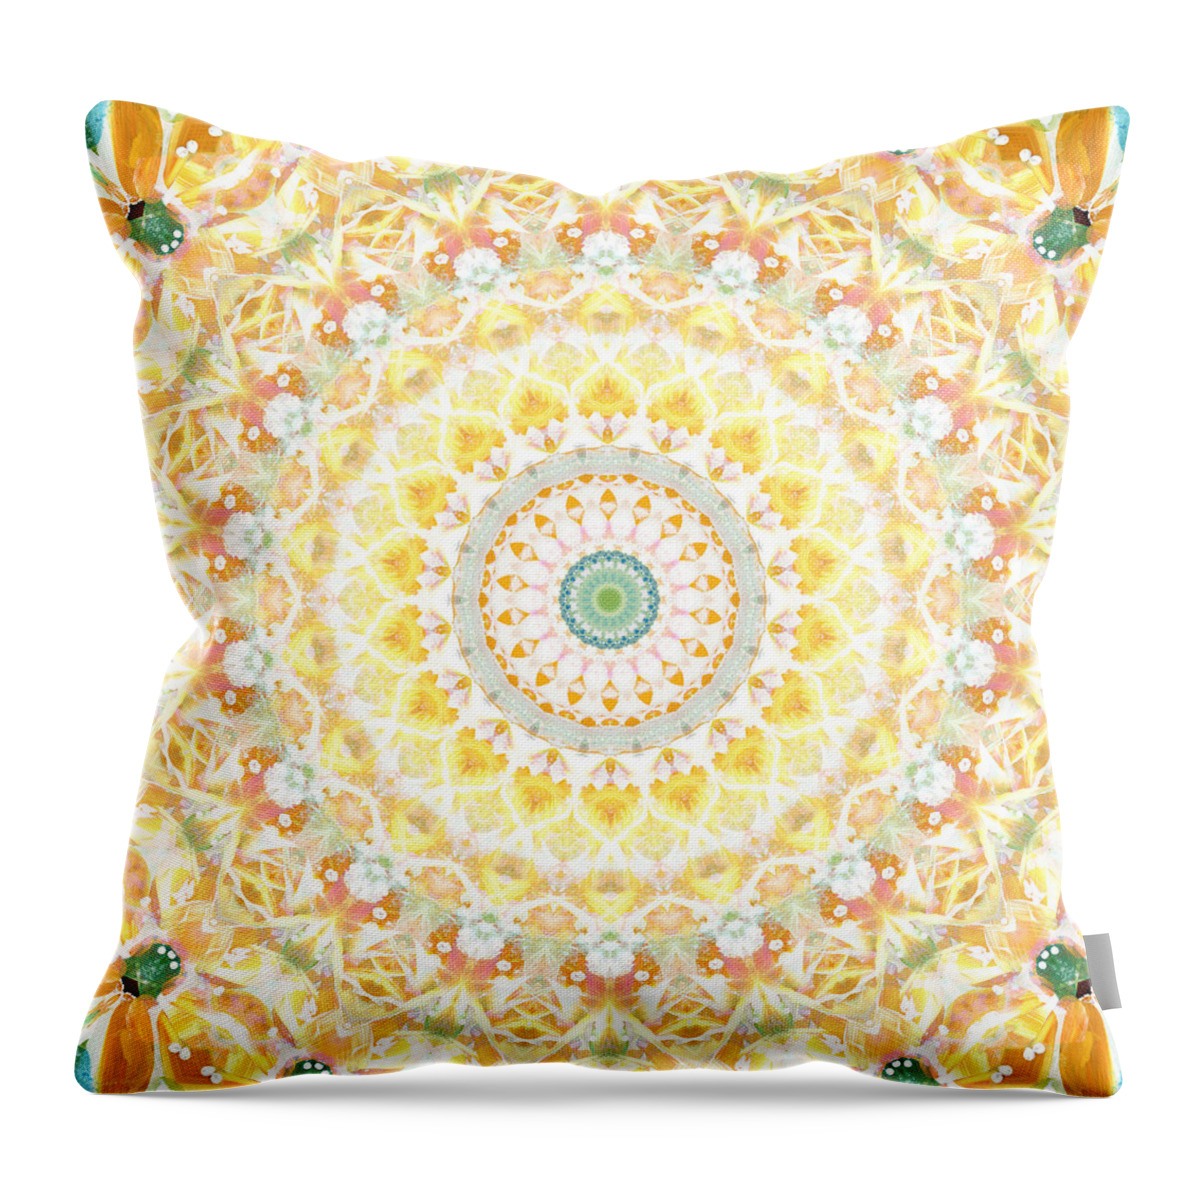 Sunflower Throw Pillow featuring the painting Sunflower Mandala- Abstract Art by Linda Woods by Linda Woods